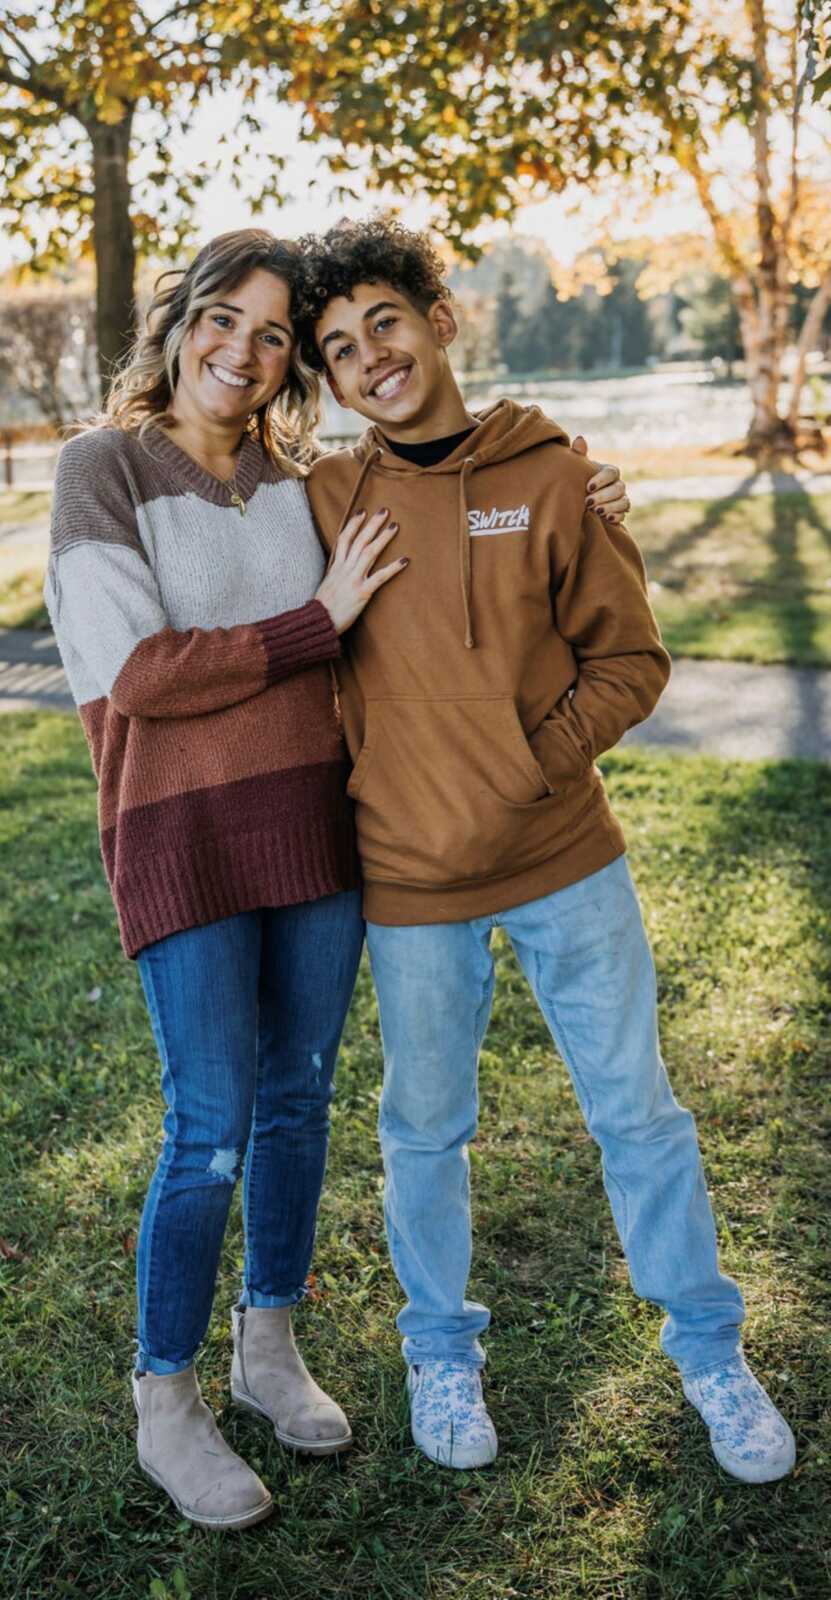 Mom and teenage son hugging and smiling outdoors wearing earthy colored clothing